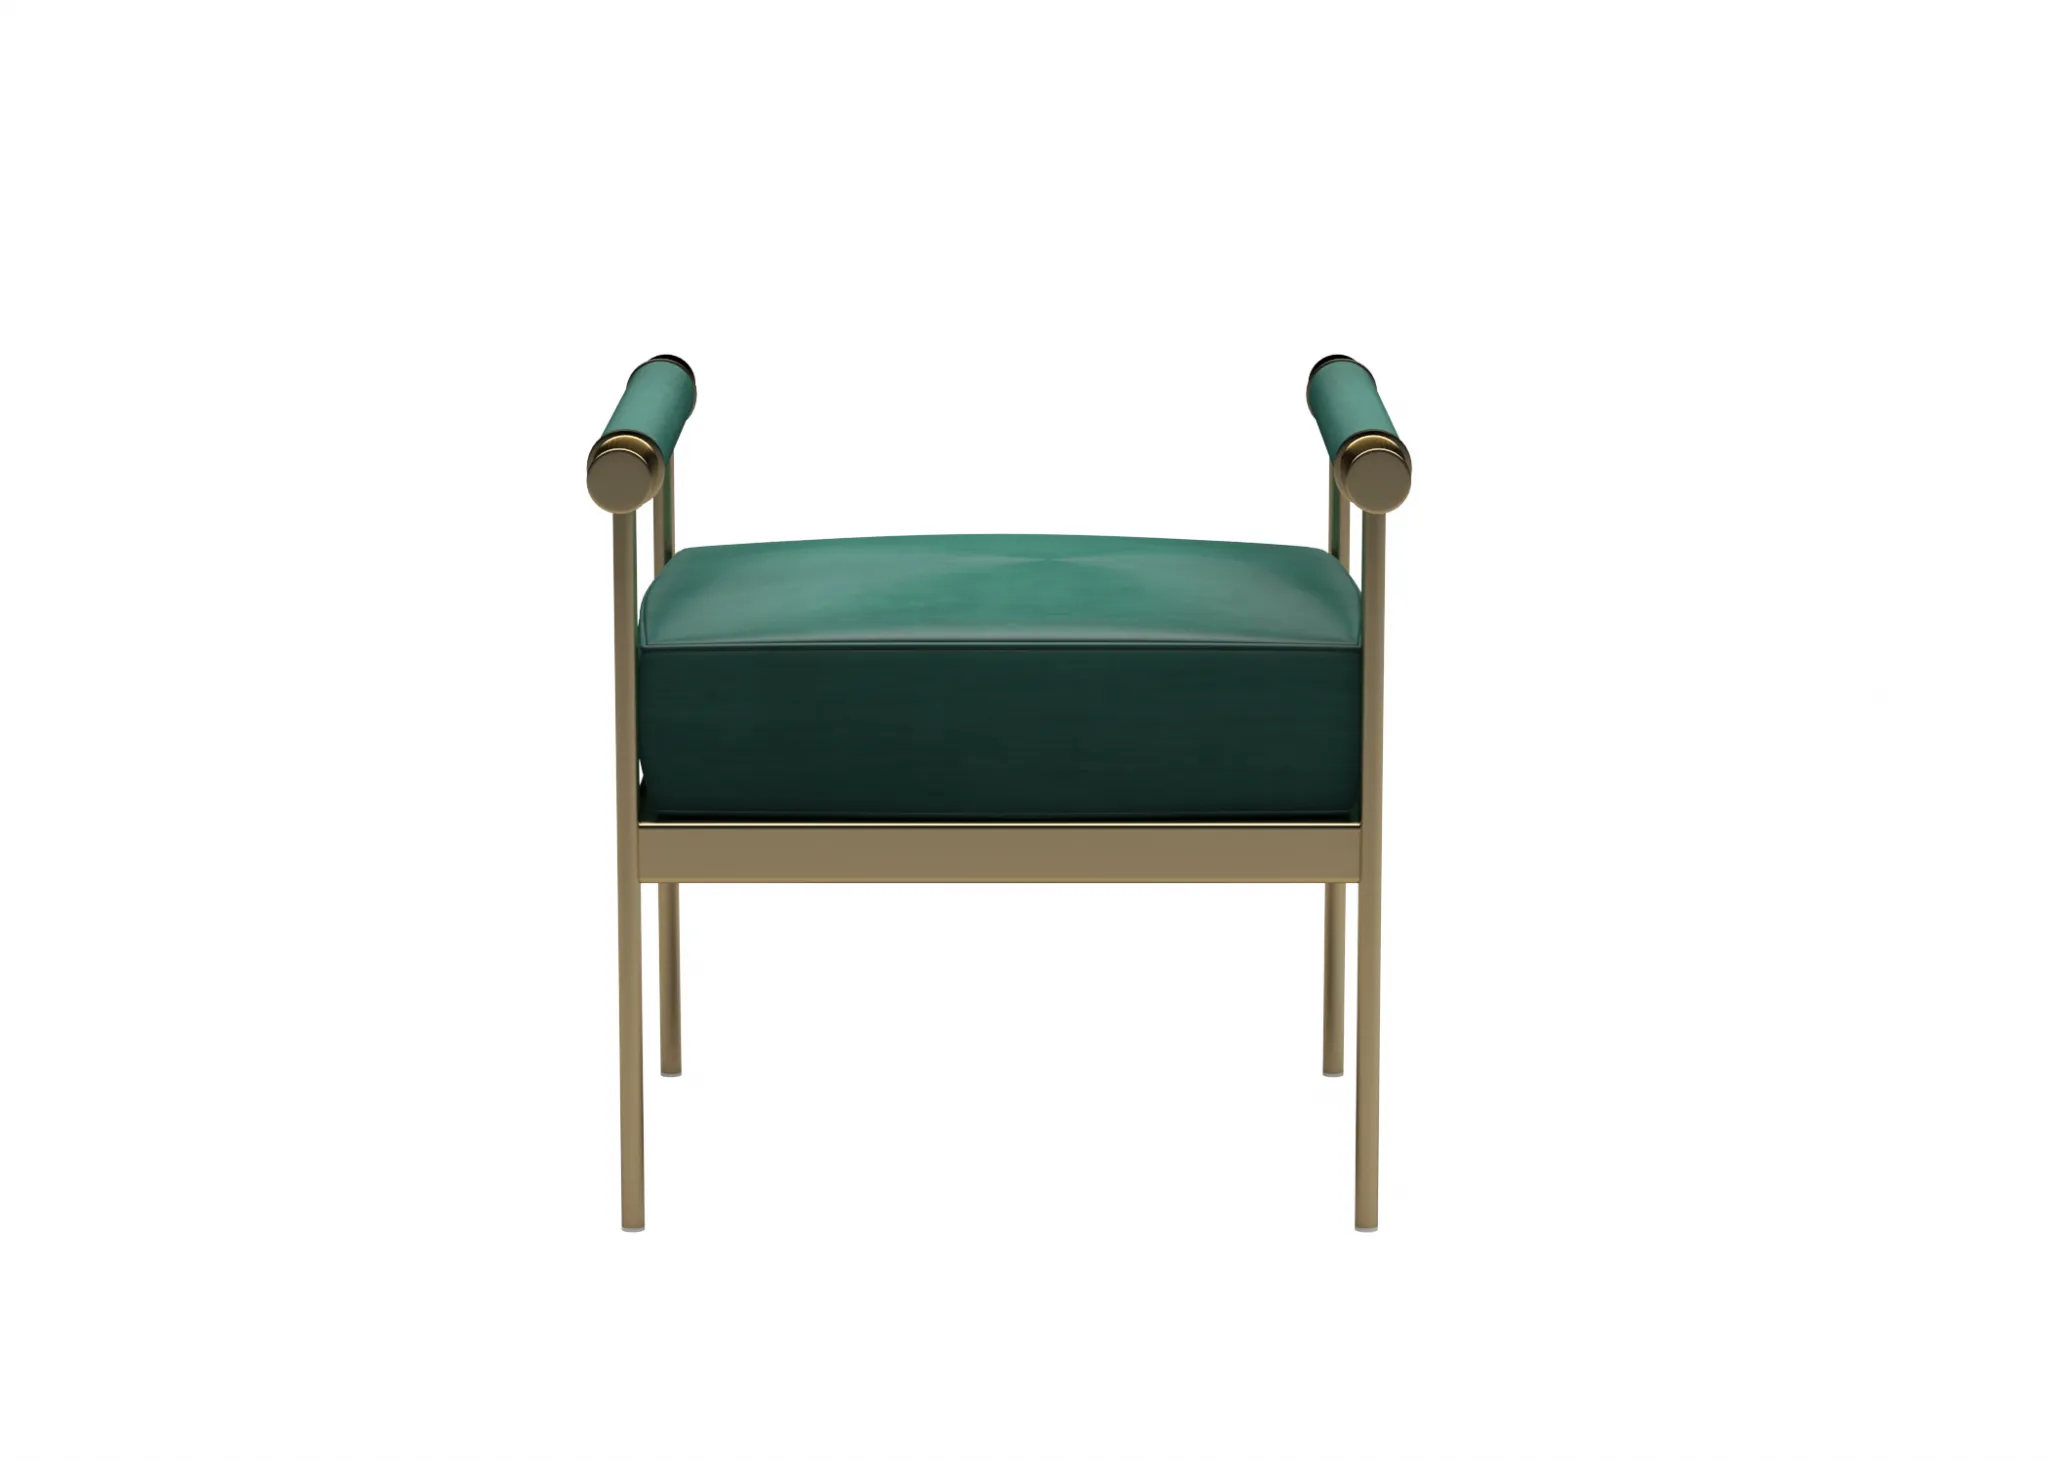 FURNITURE 3D MODELS – CHAIRS – 0438